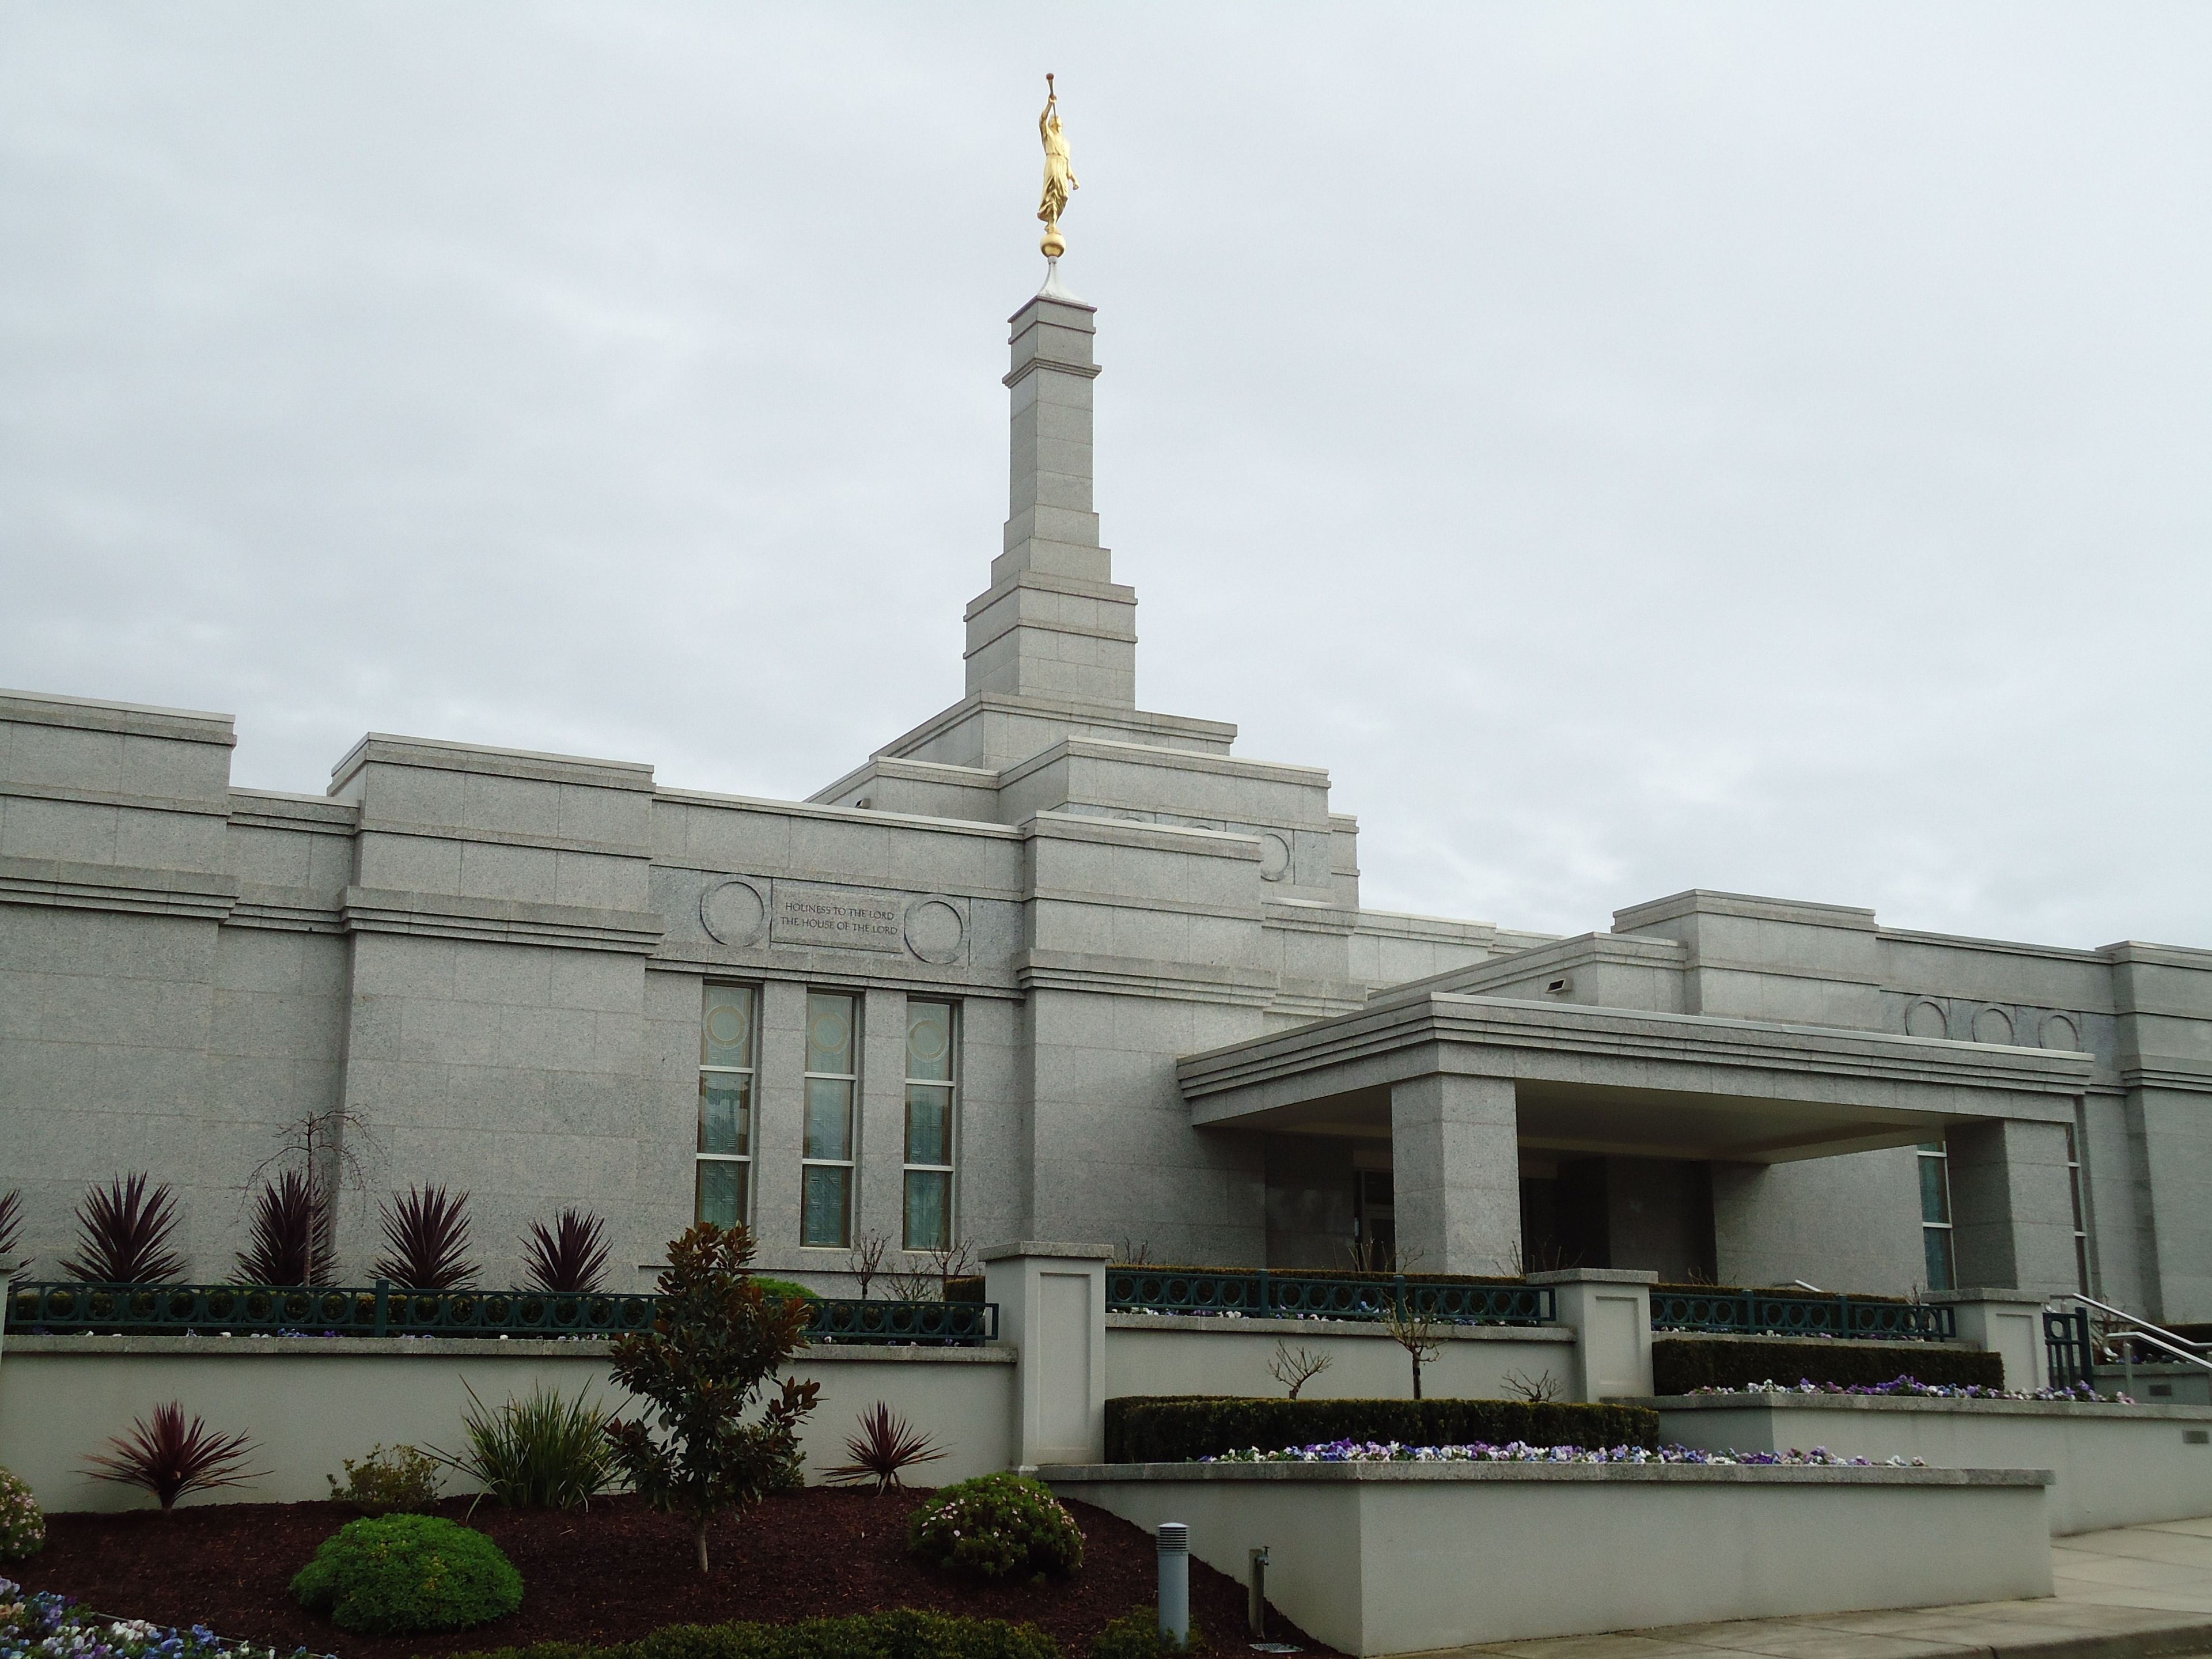 The Melbourne Australia Temple entrance, including scenery and the exterior of the temple.